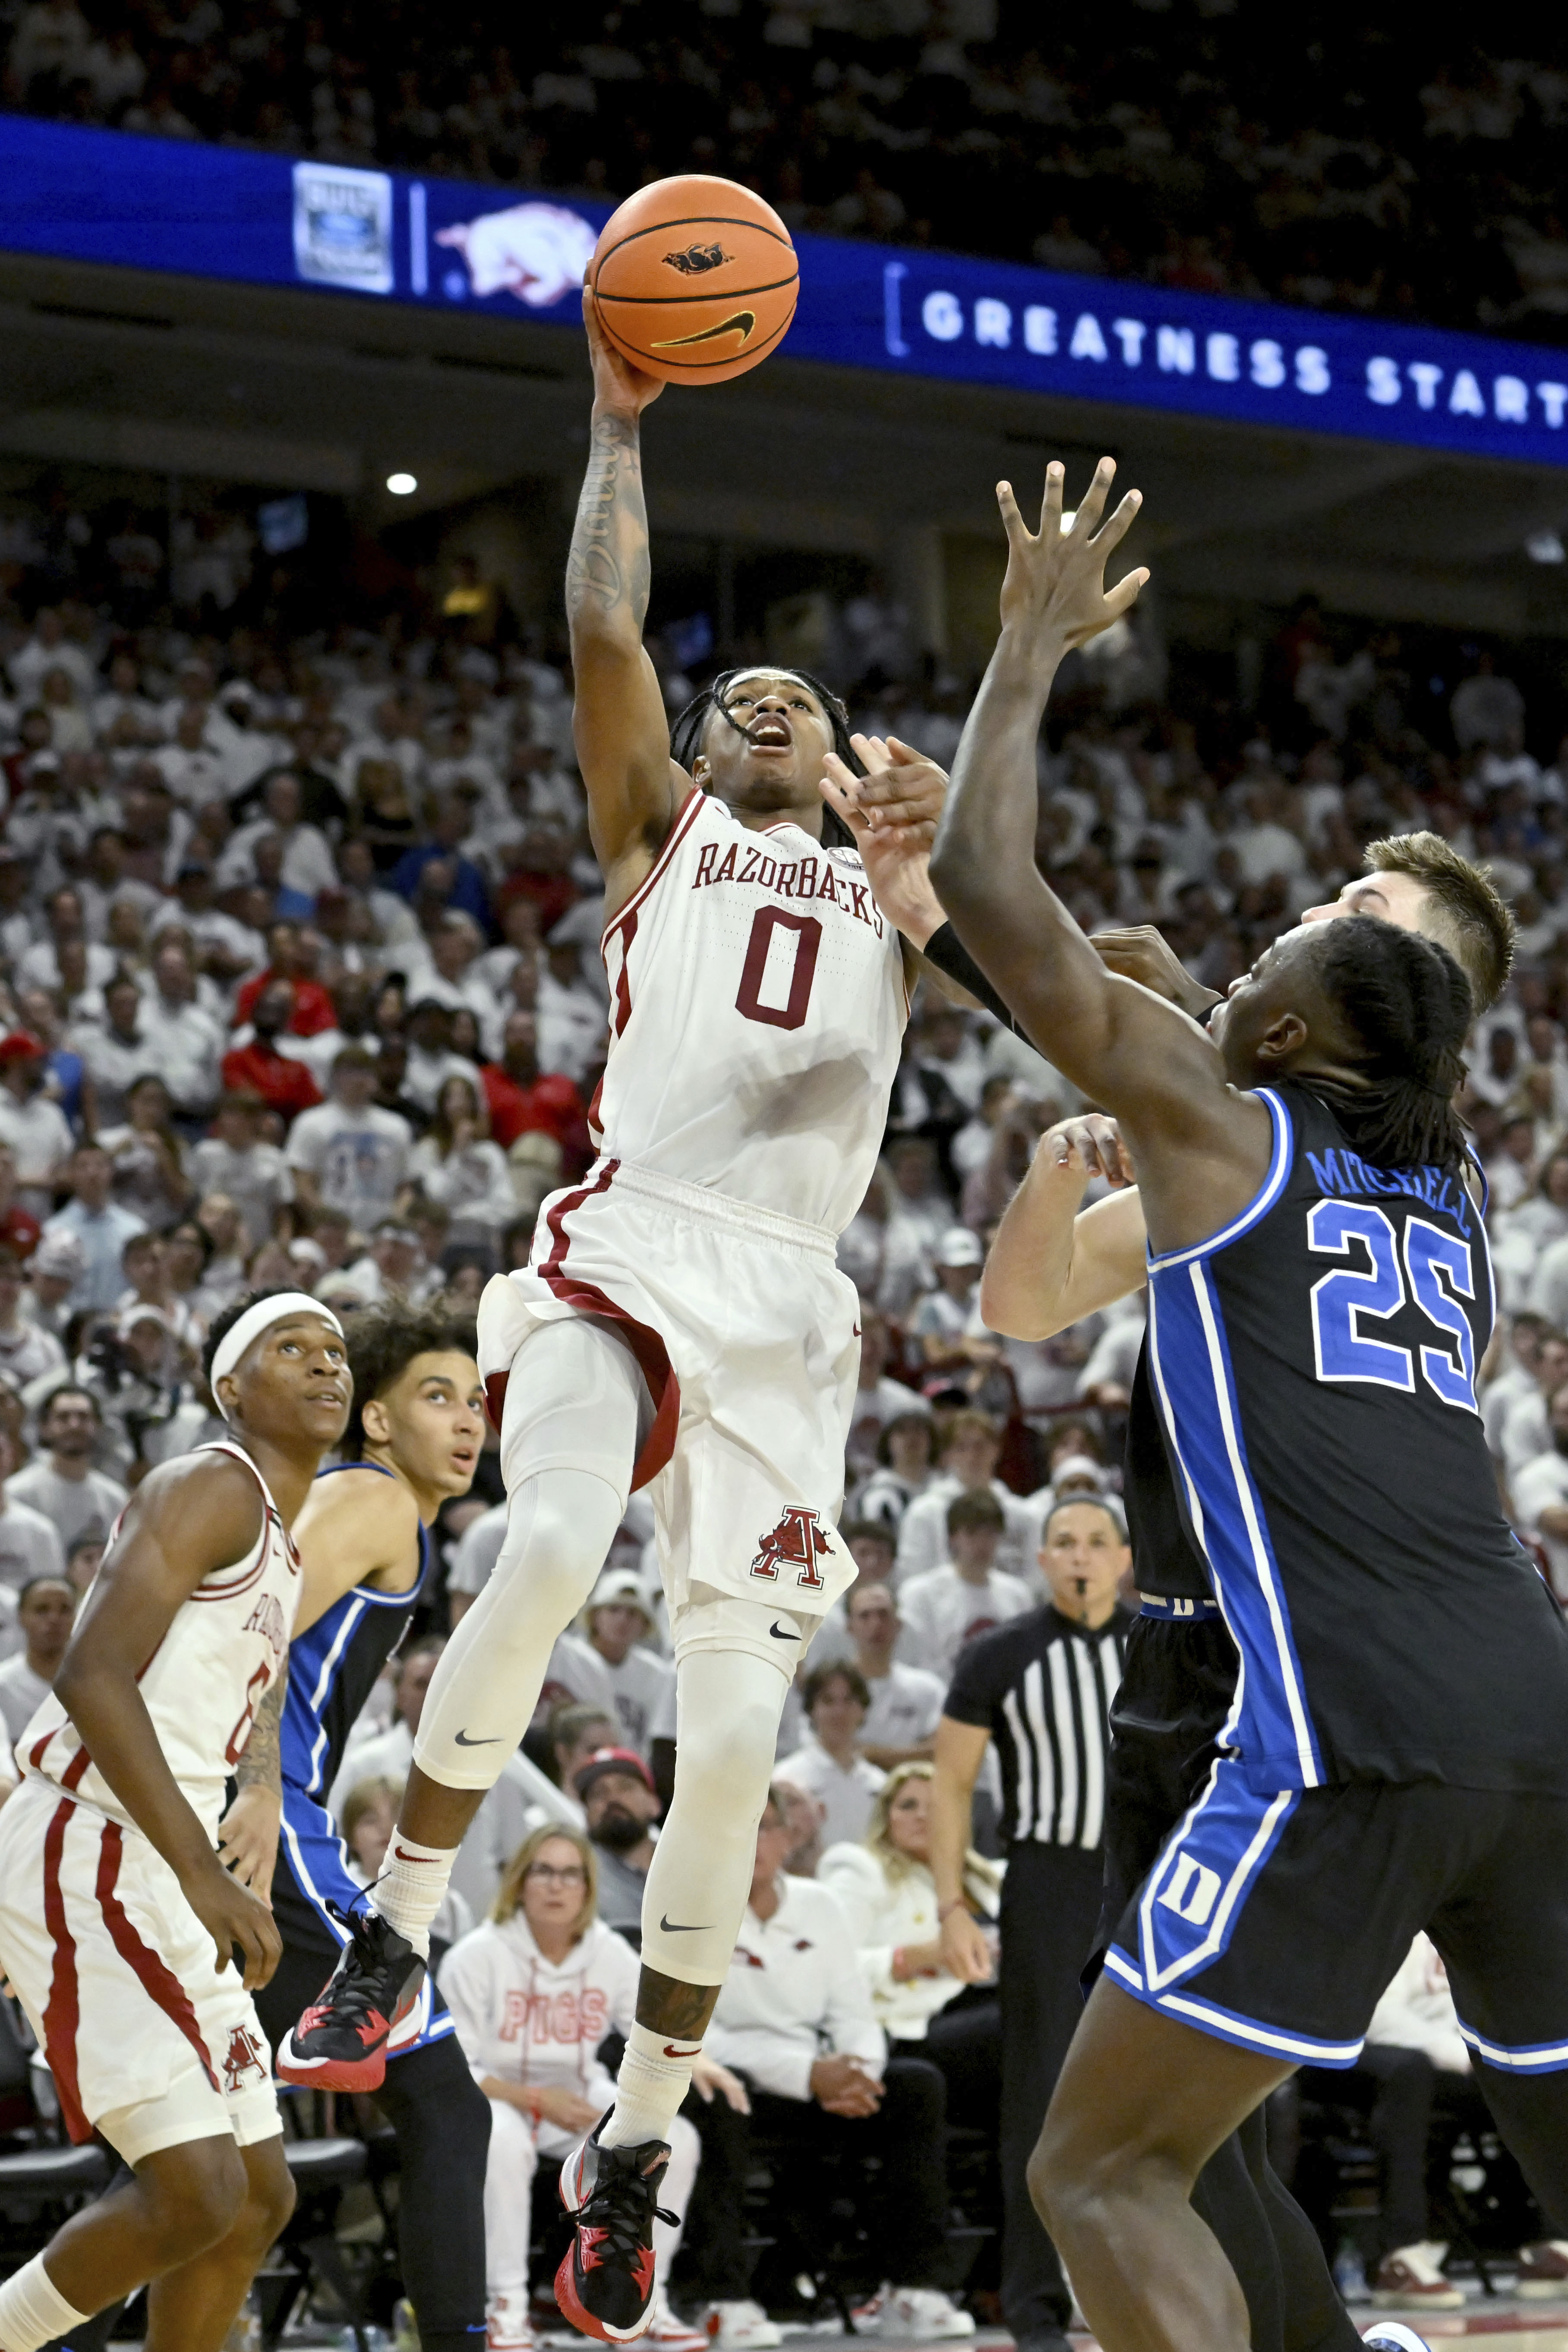 Arkansas G Tramon Mark released from hospital after late-game scare